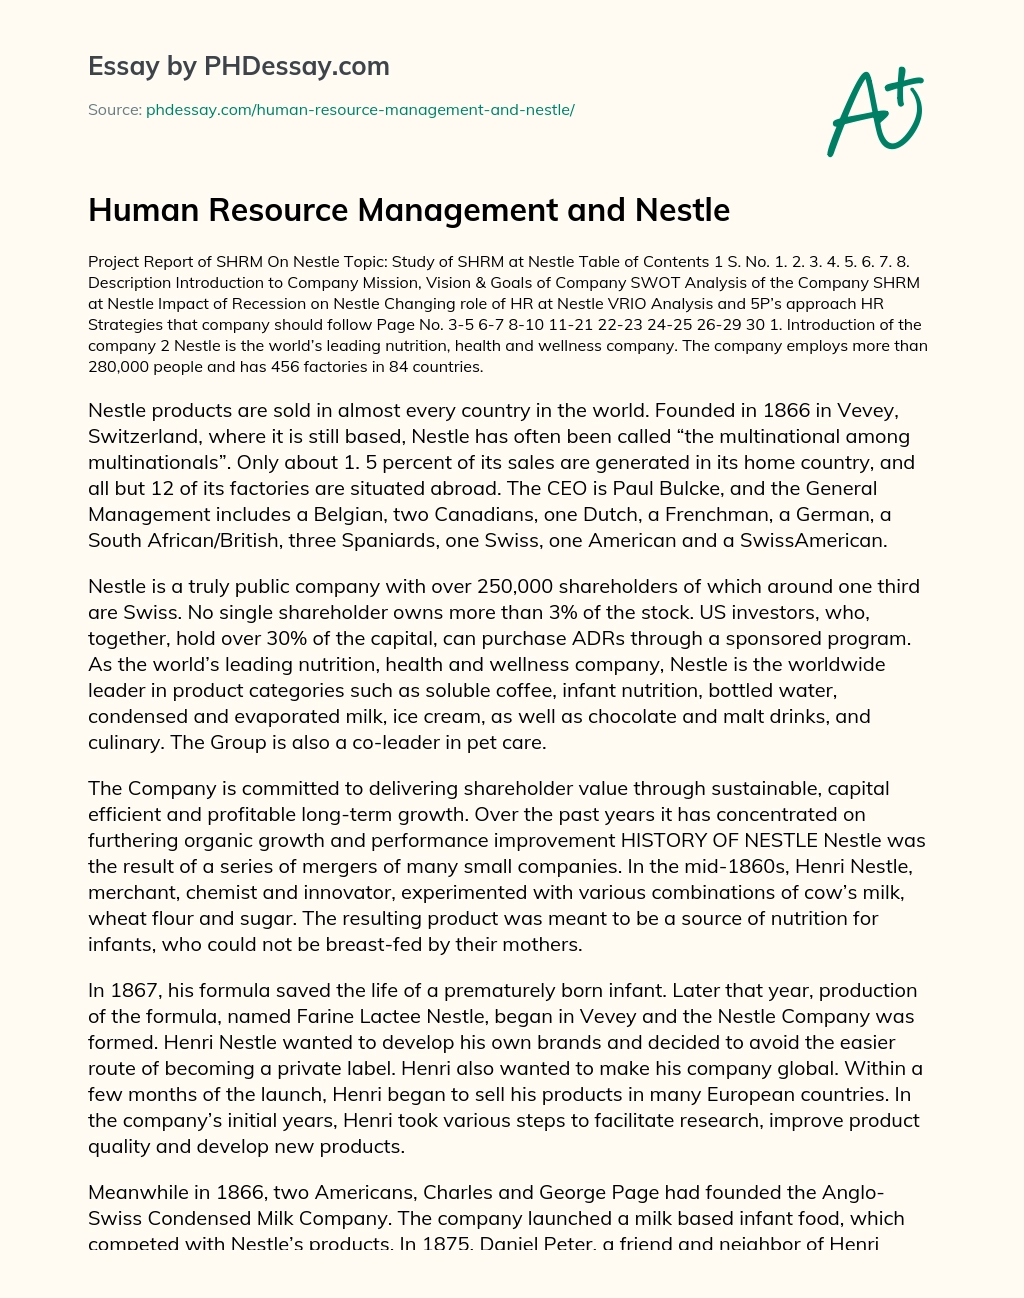 Human Resource Management and Nestle essay